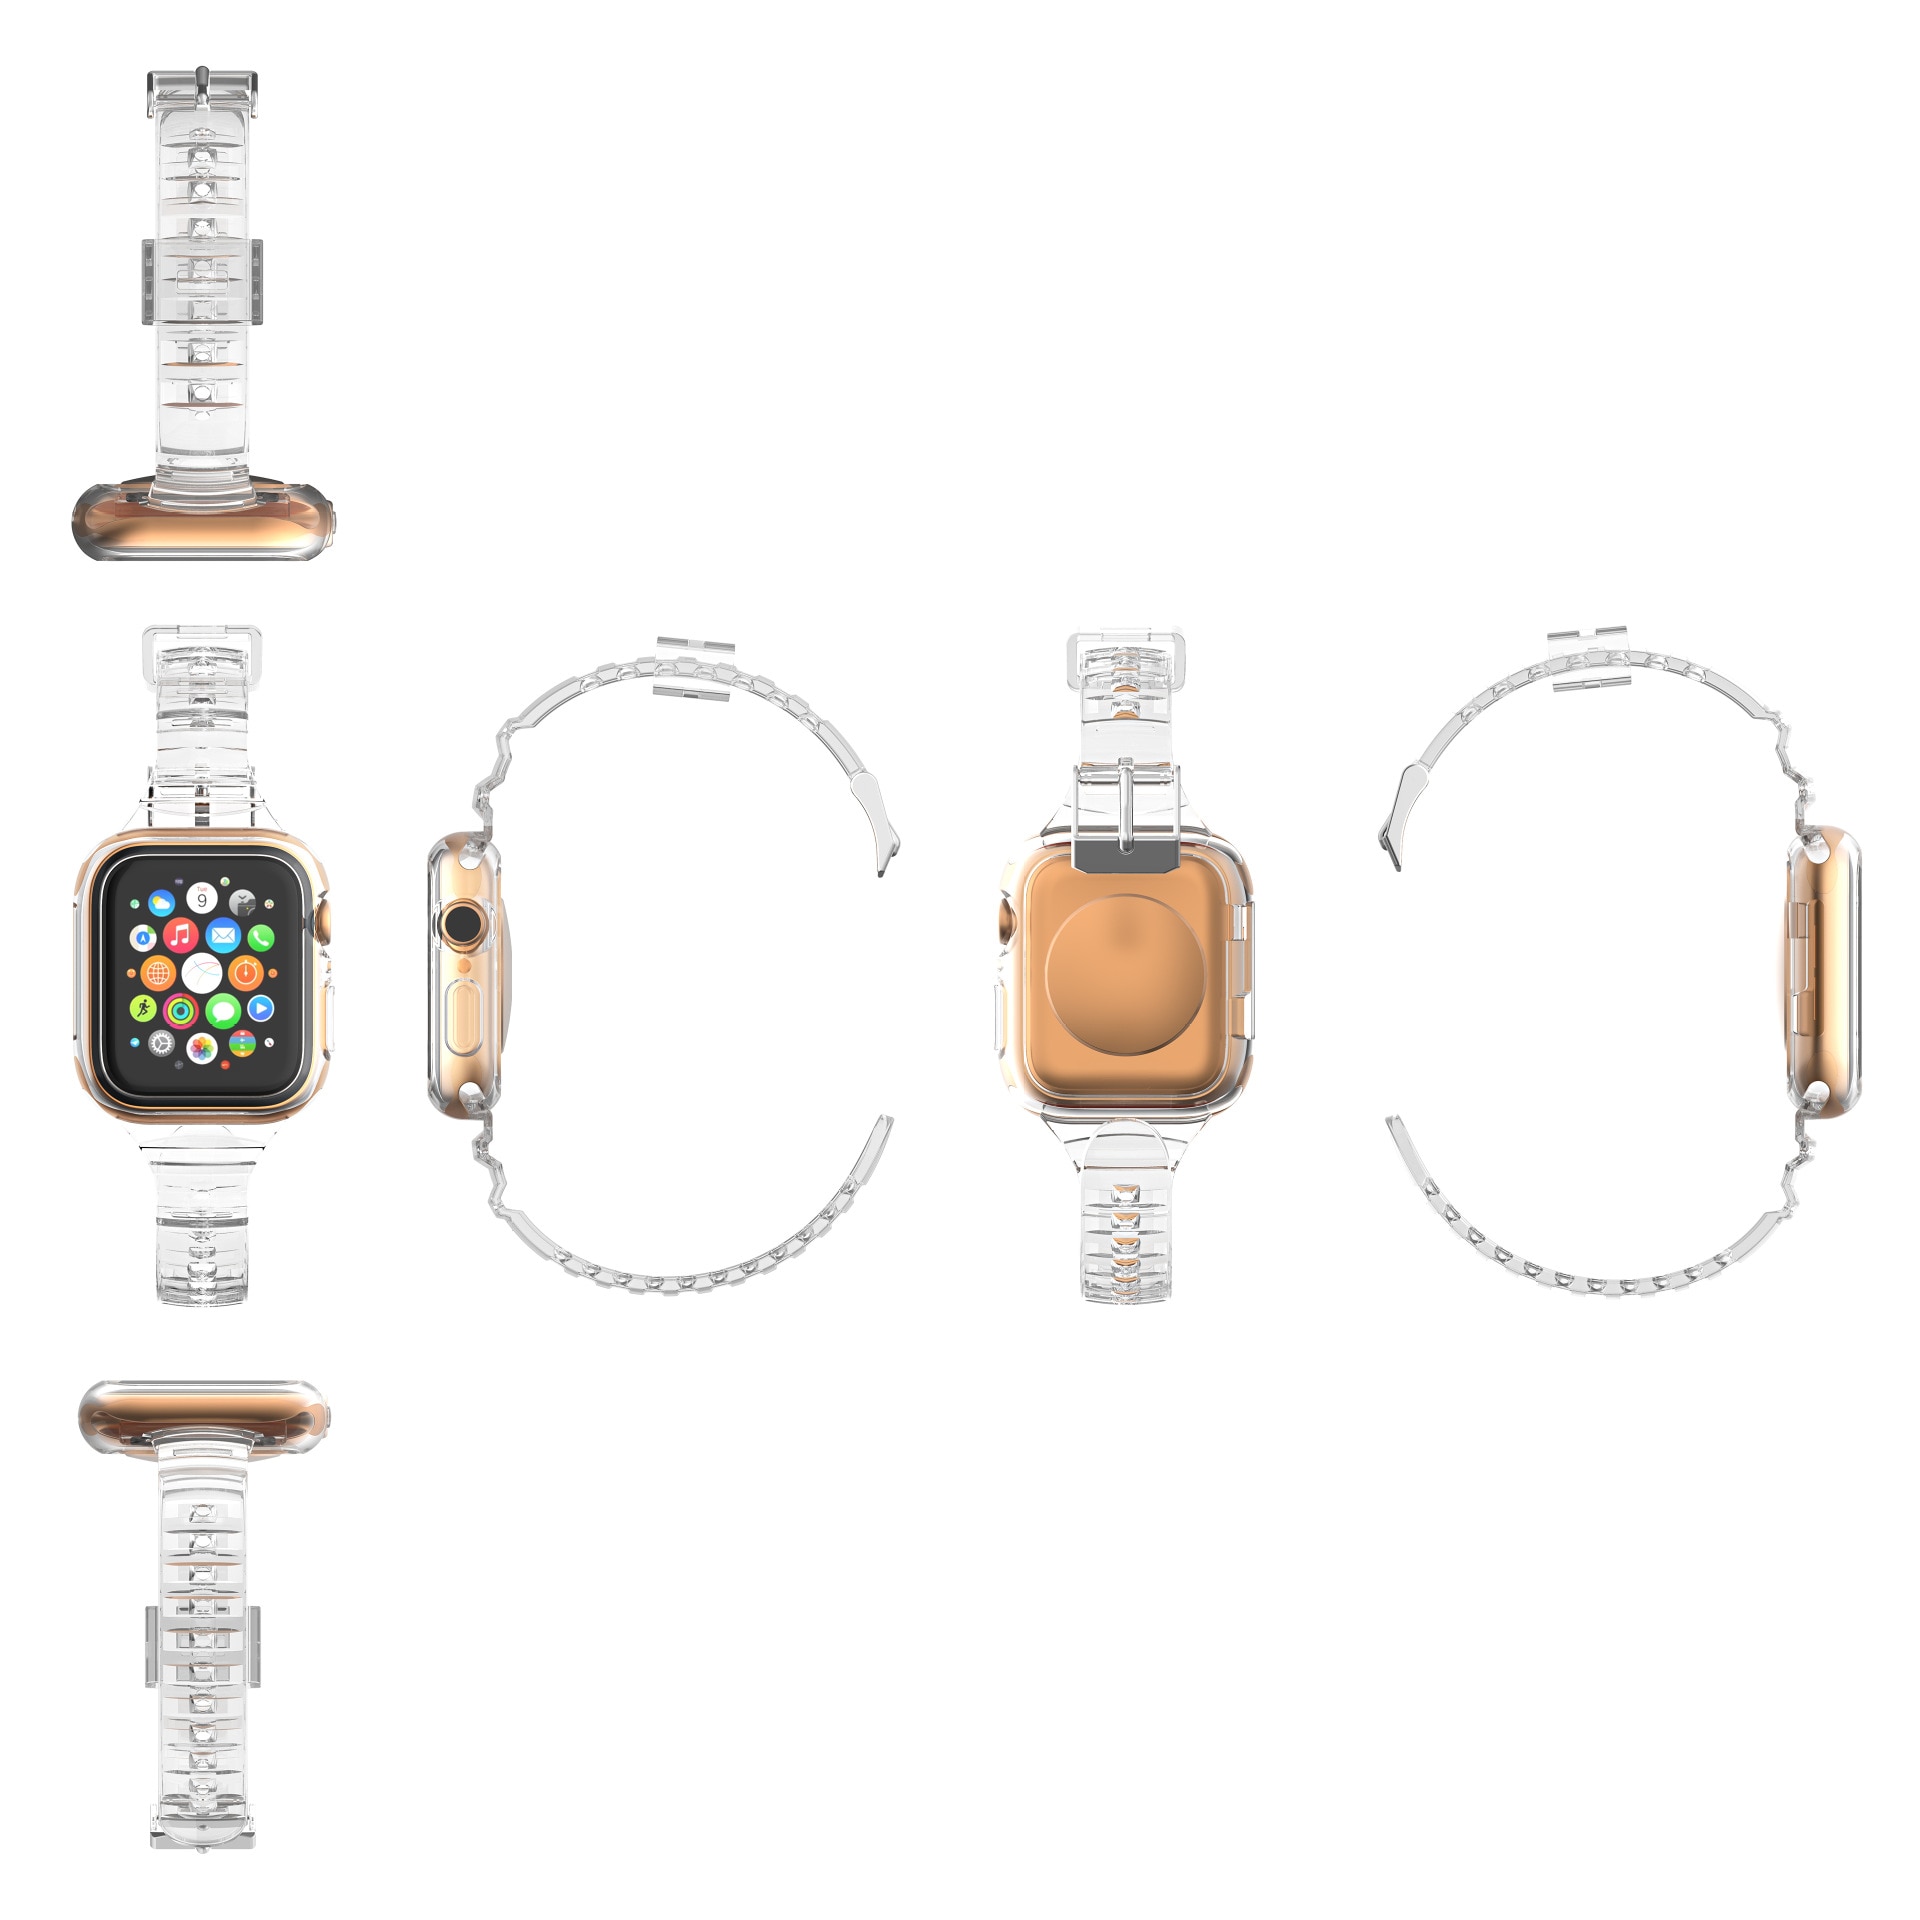 Dây Đeo Silicon Co Dãn Cho Đồng Hồ Apple 5 40mm 44mm Iwatch Series 4 / 5 / 6 / Se